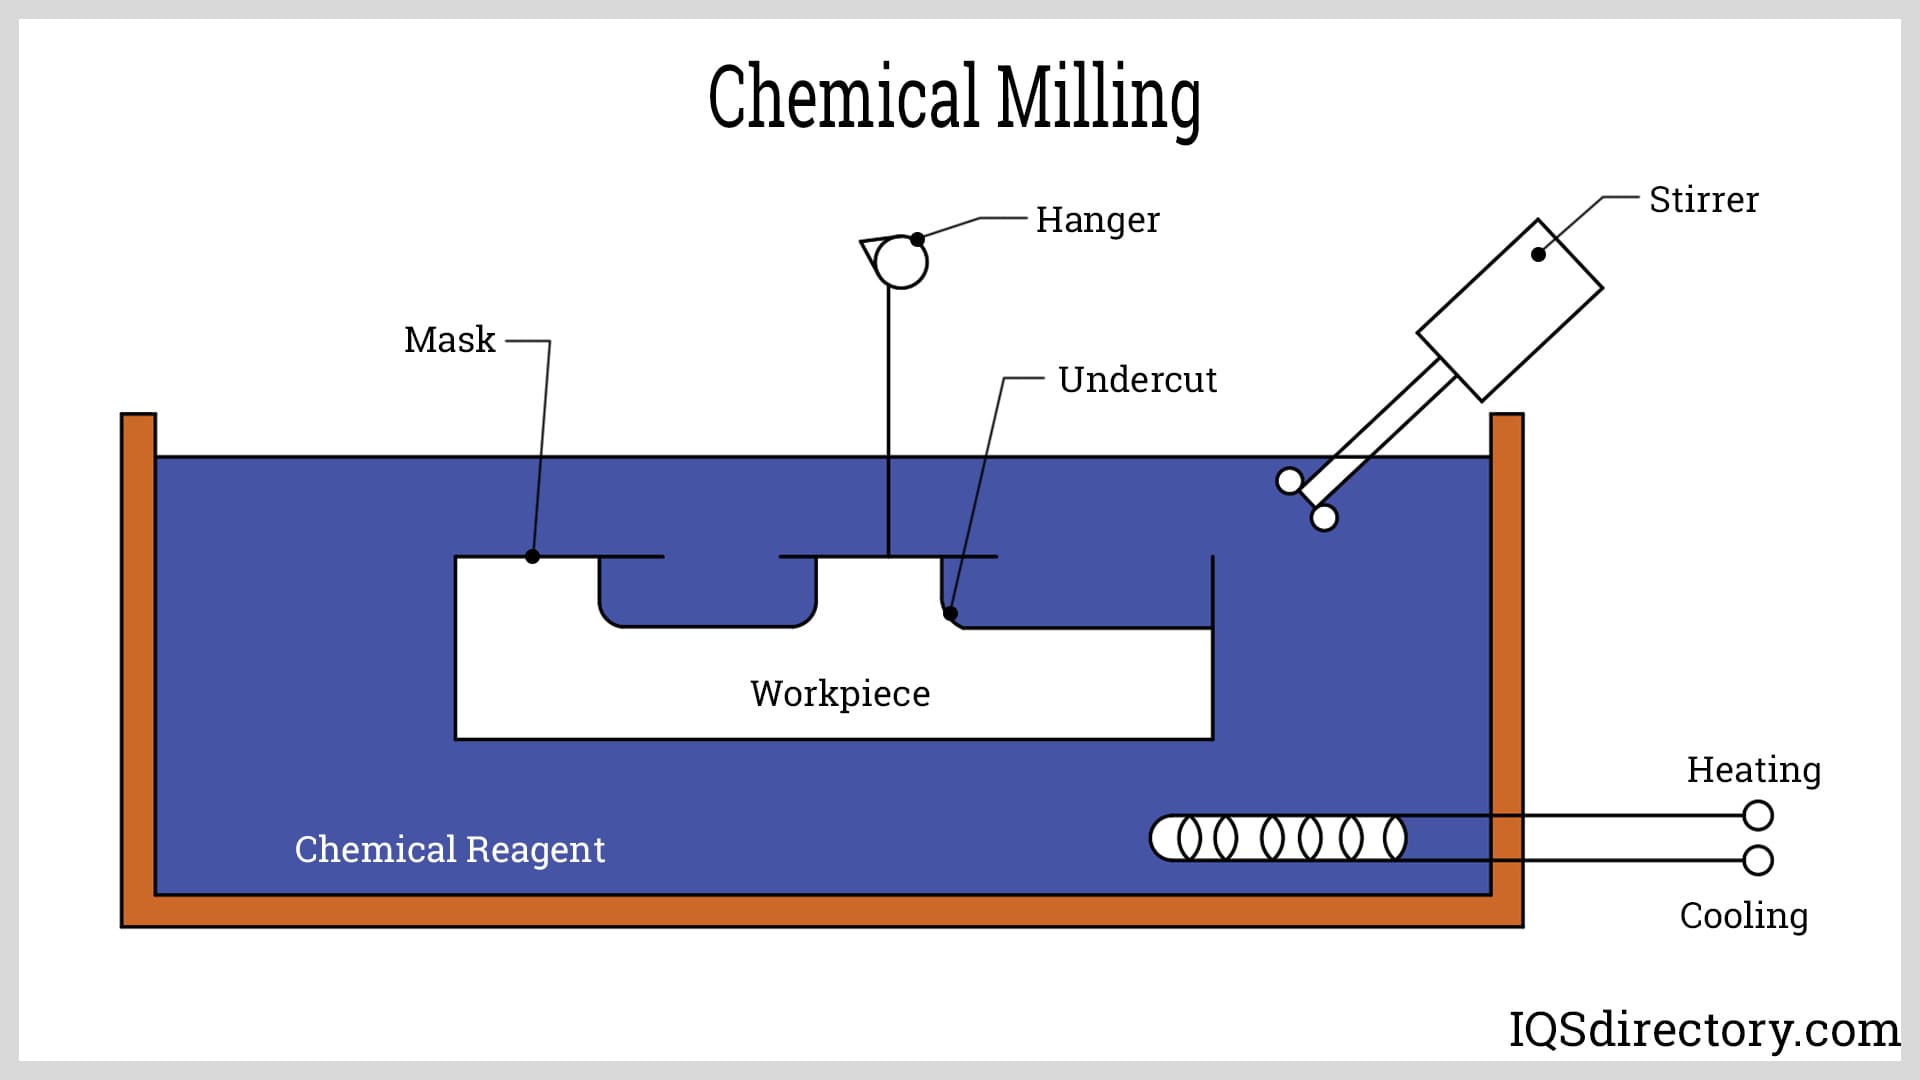 Chemical Milling